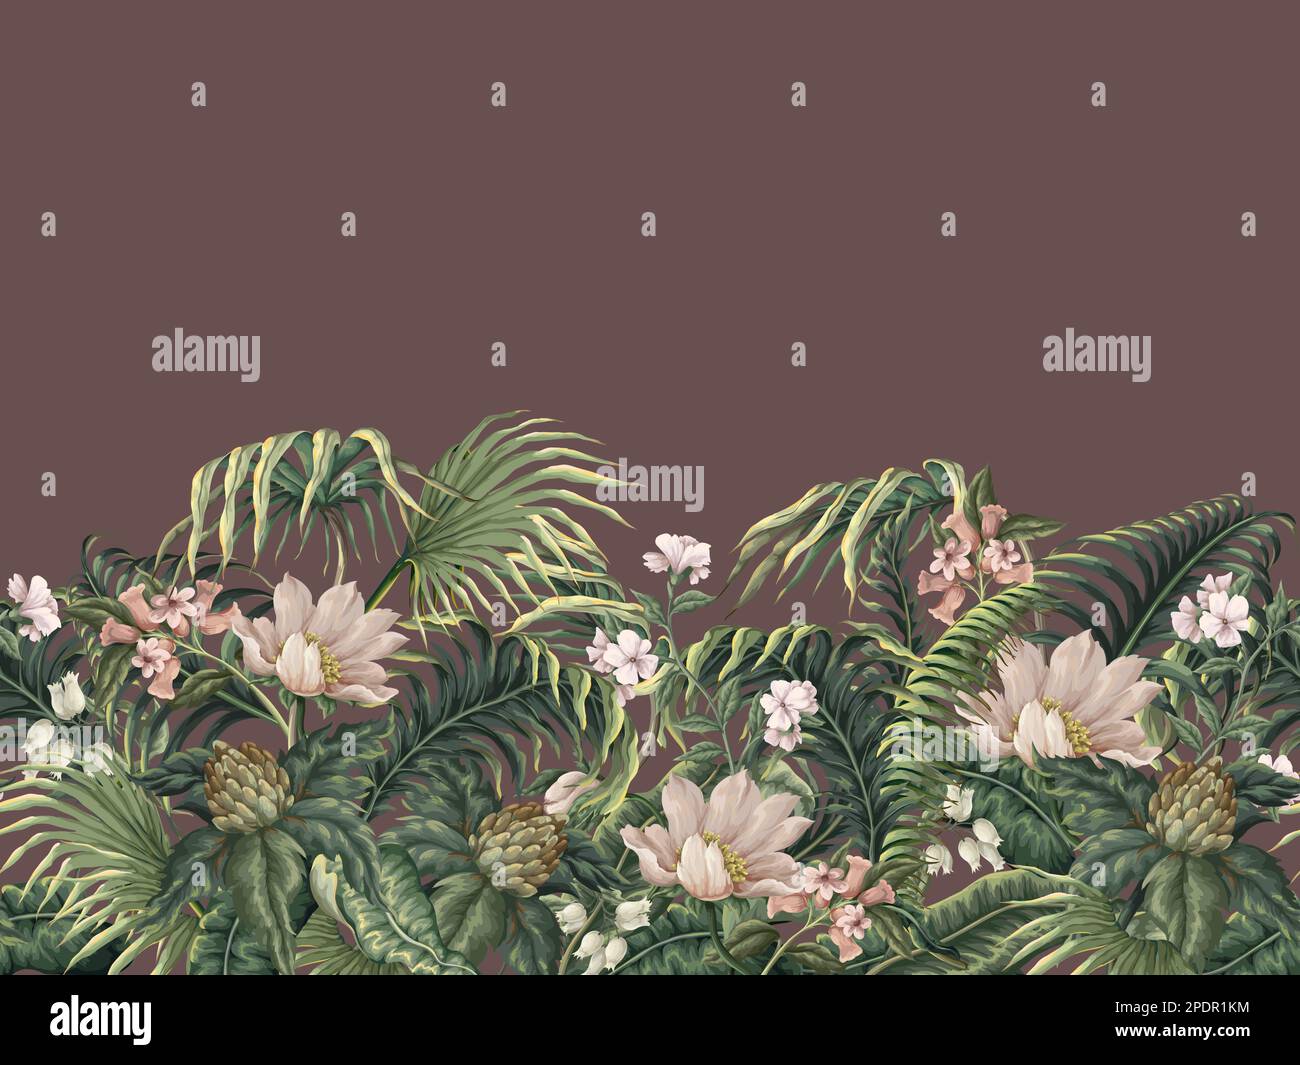 Border with tropical leaves, plants and flowers. Vector. Stock Vector